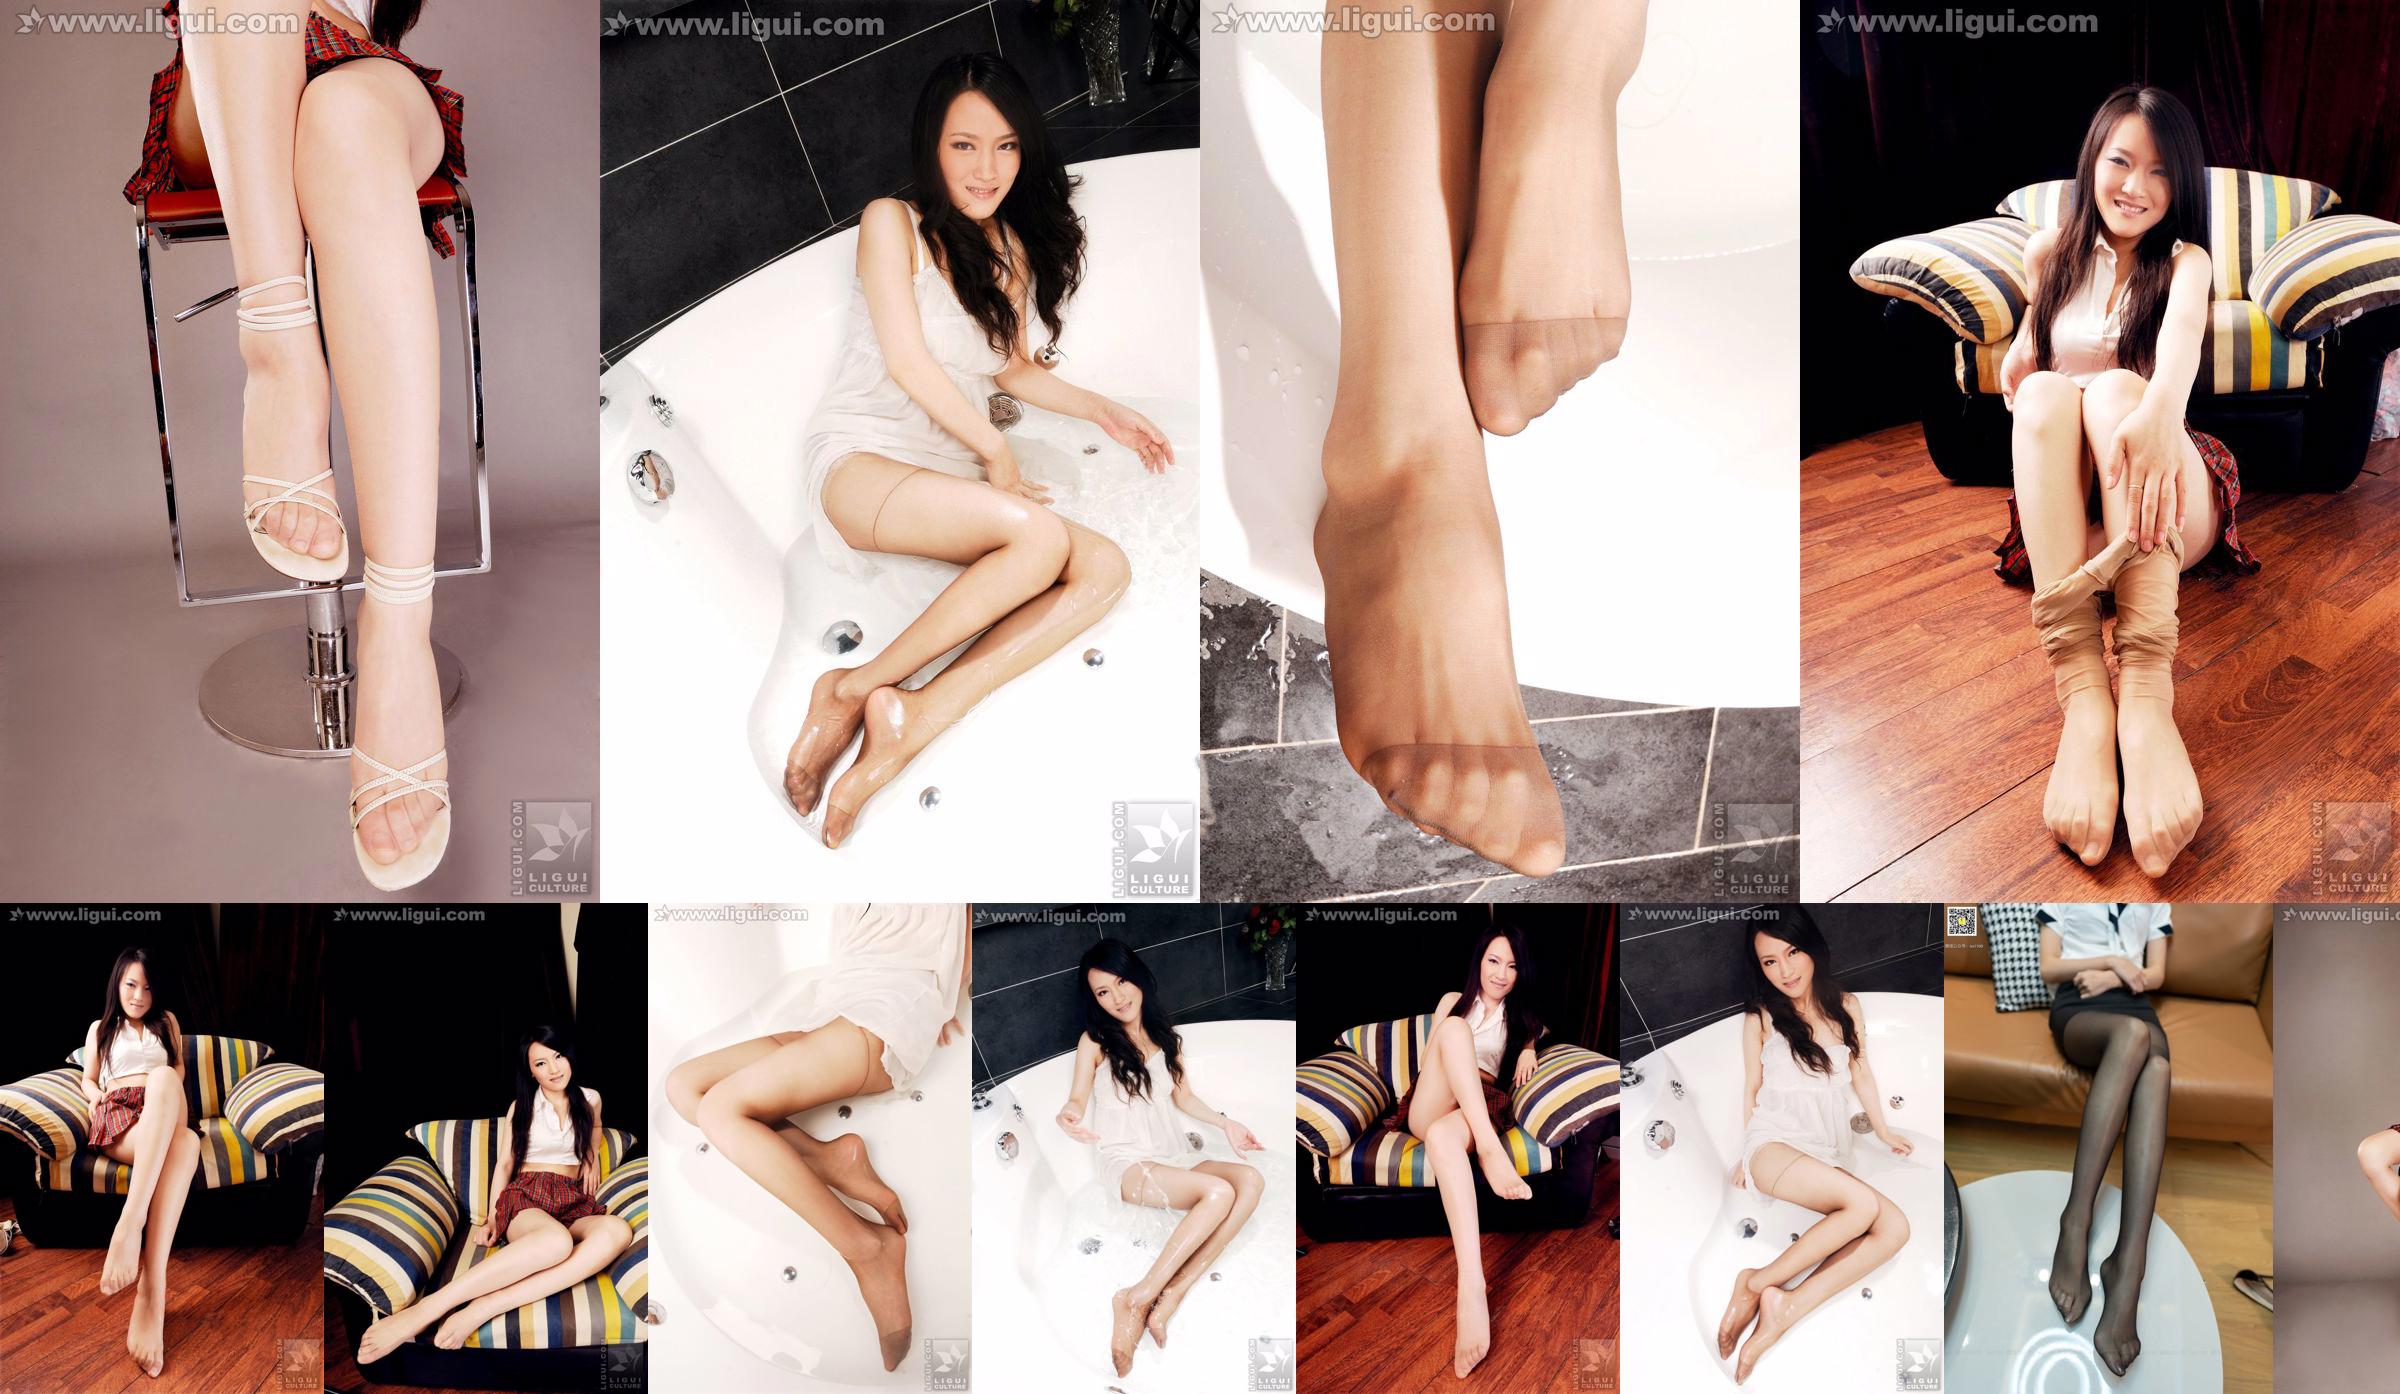 Model Wen Ting "Pure and Beautiful Feet" [丽 柜 LiGui] Silk Foot Photo Picture No.28a2fa Pagina 7